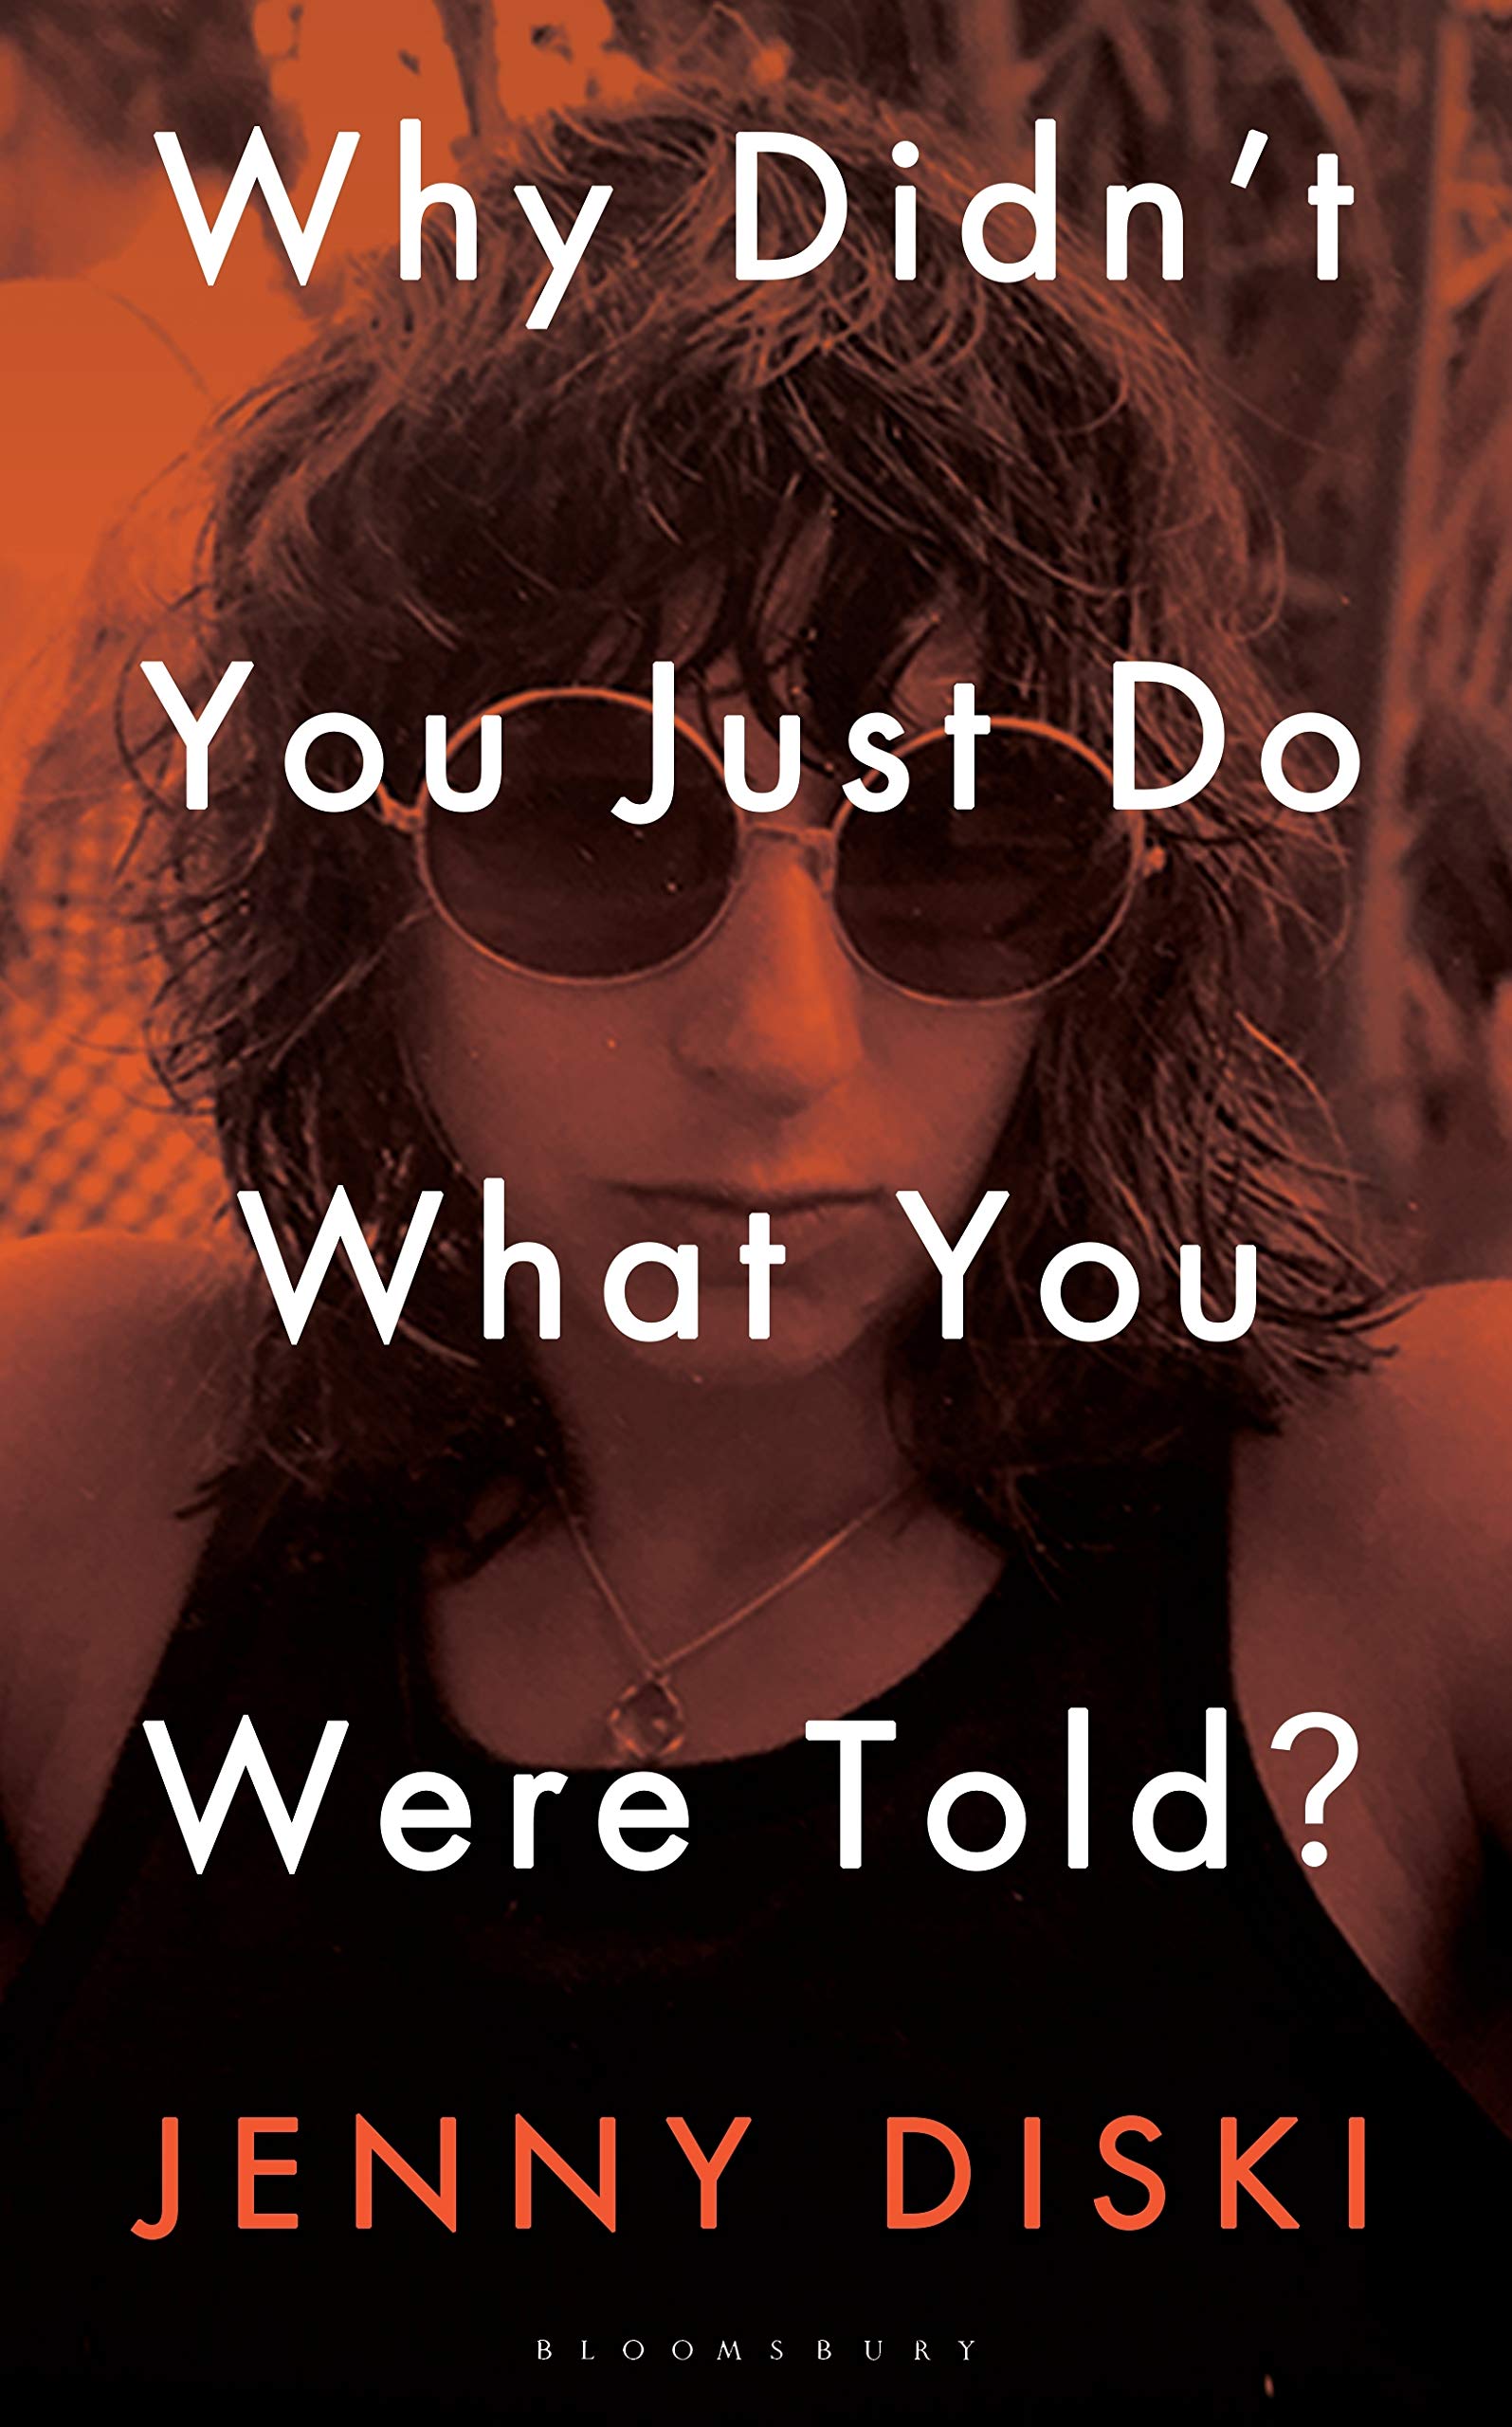 Cover of Why Didn't You Just Do What You Were Told; an orange-toned photo of a woman in sunglasses